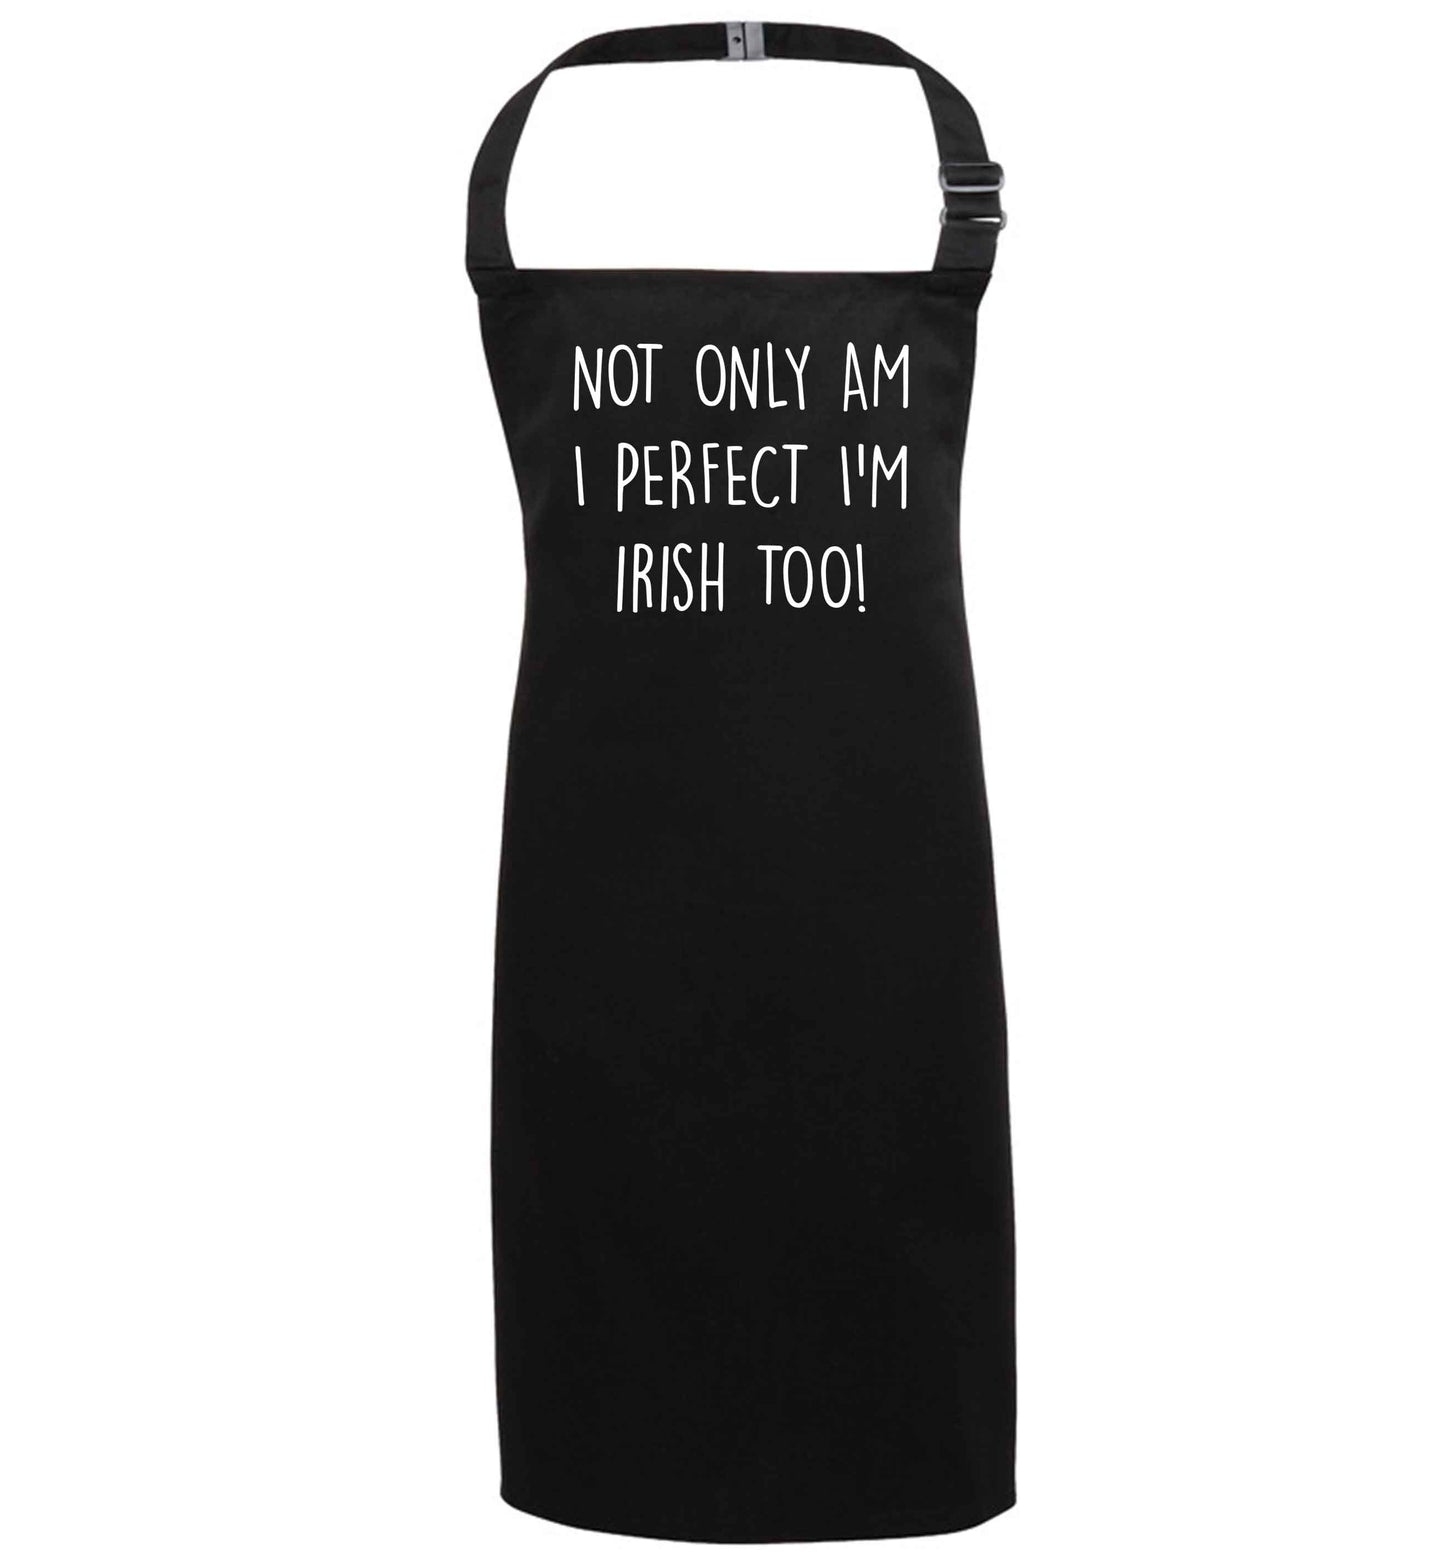 Not only am I perfect I'm Irish too! black apron 7-10 years